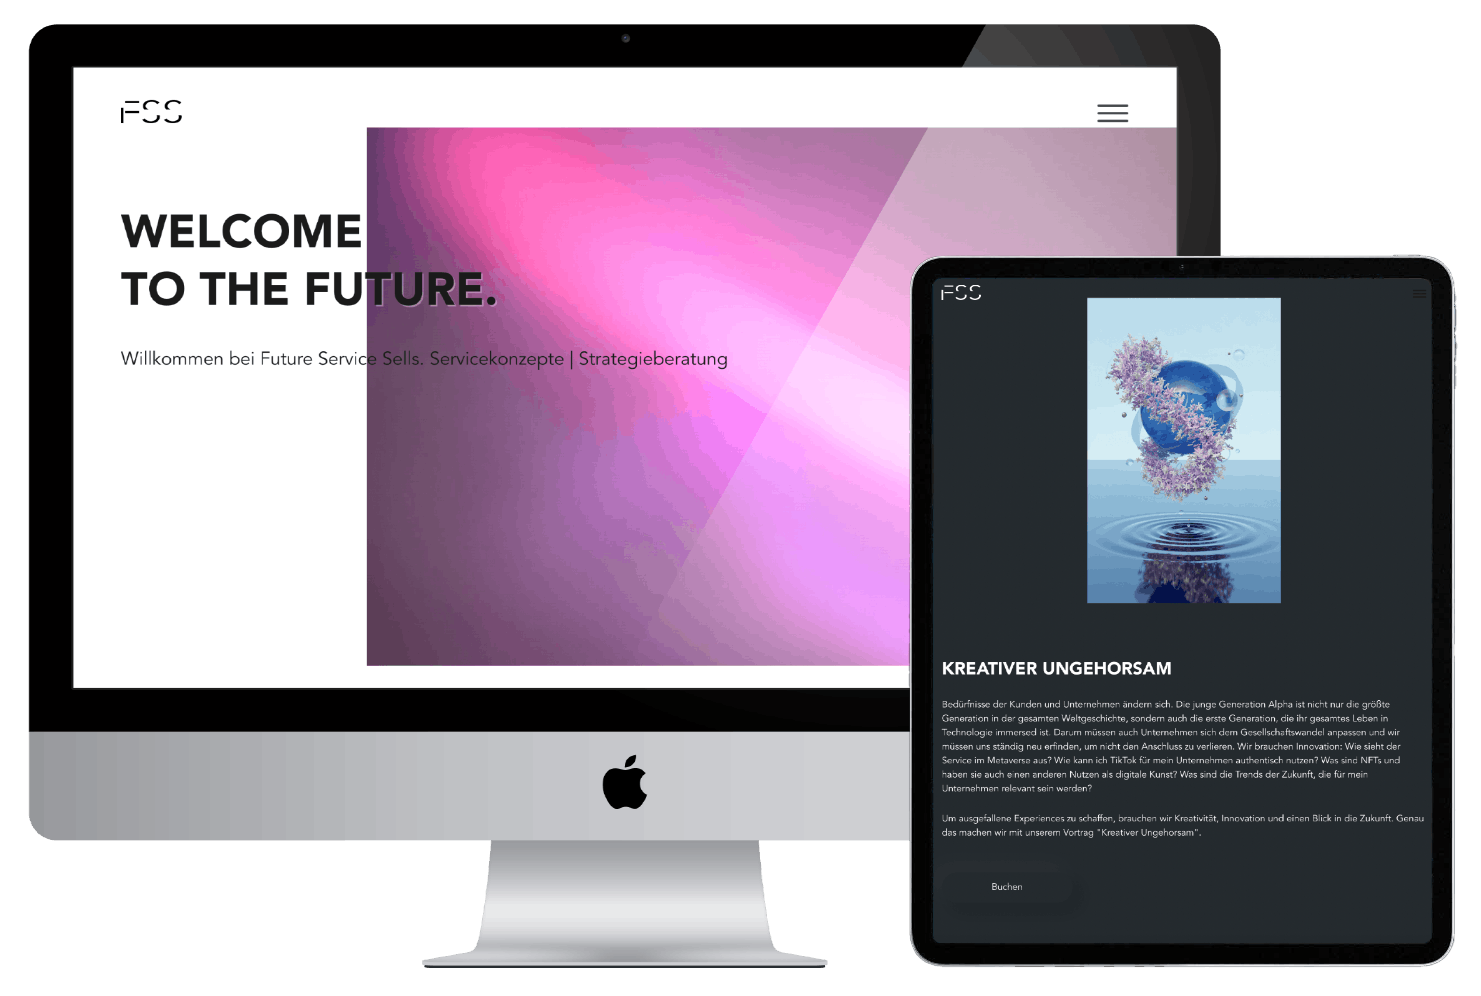 Future Service Sells Corporate Identity and Website